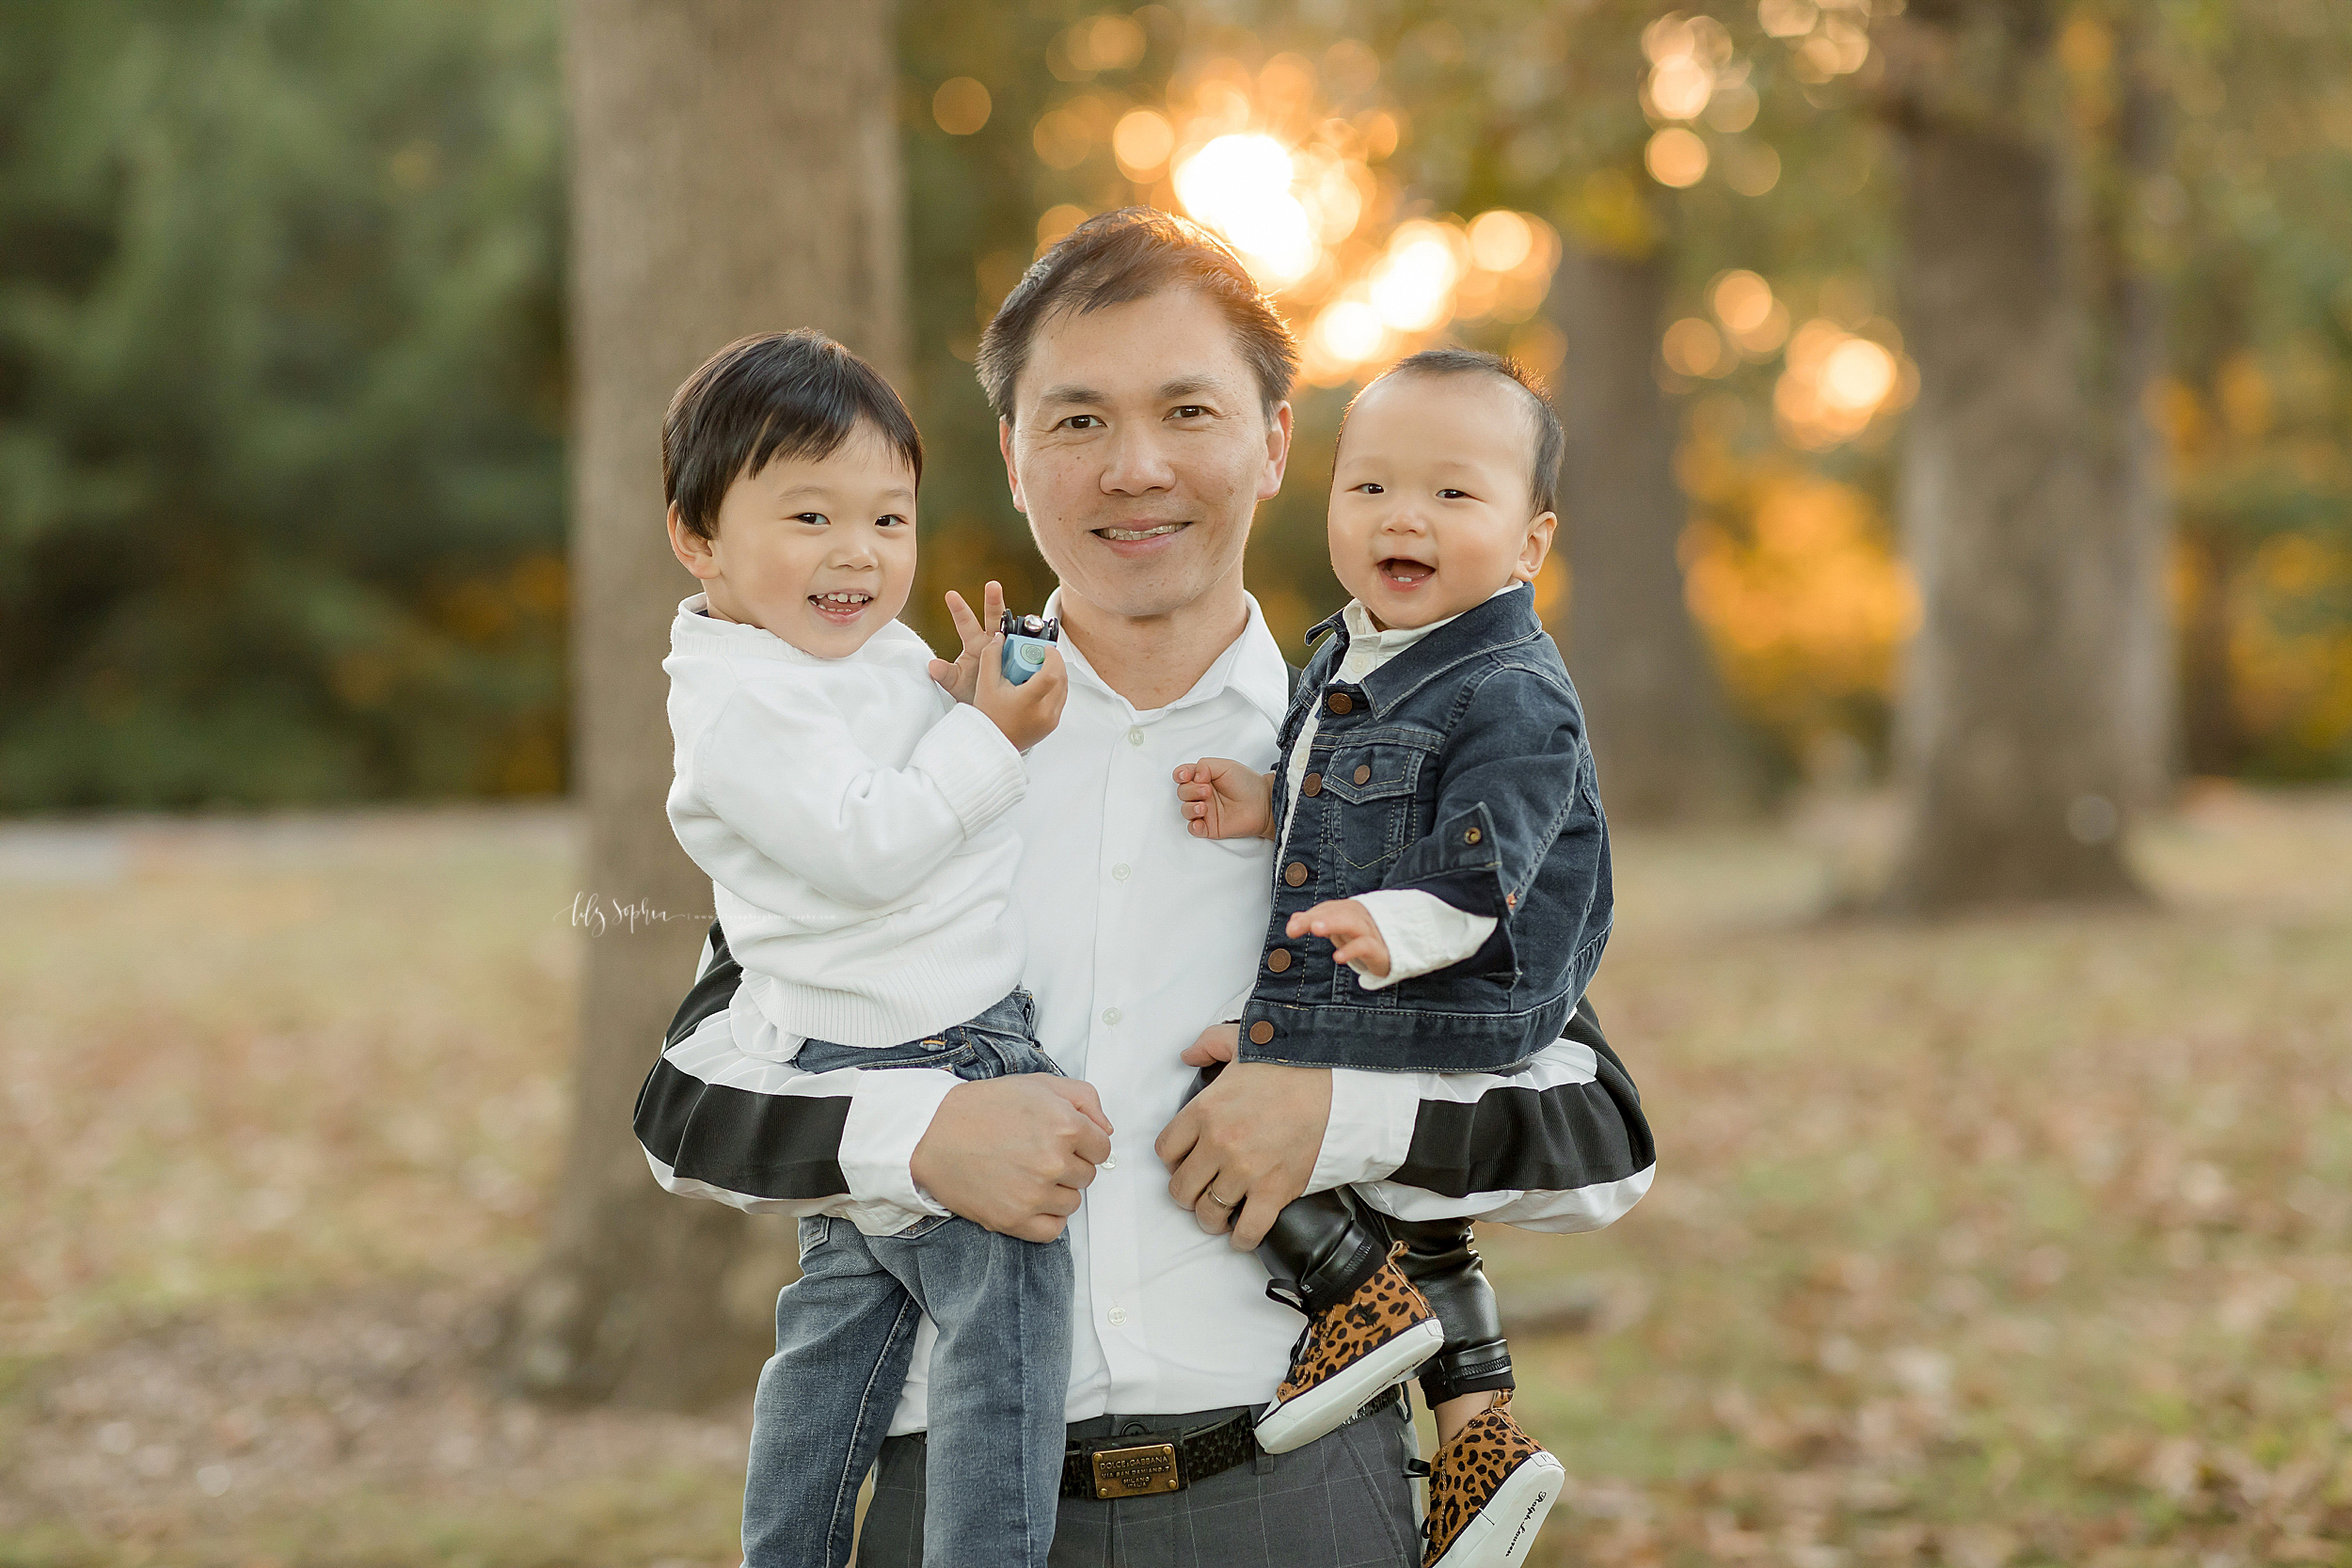 atlanta-buckhead-brookhaven-decatur-lily-sophia-photography--photographer-portraits-grant-park-intown-park-sunset-first-birthday-cake-smash-one-year-old-outdoors-cool-asian-american-family_0090.jpg